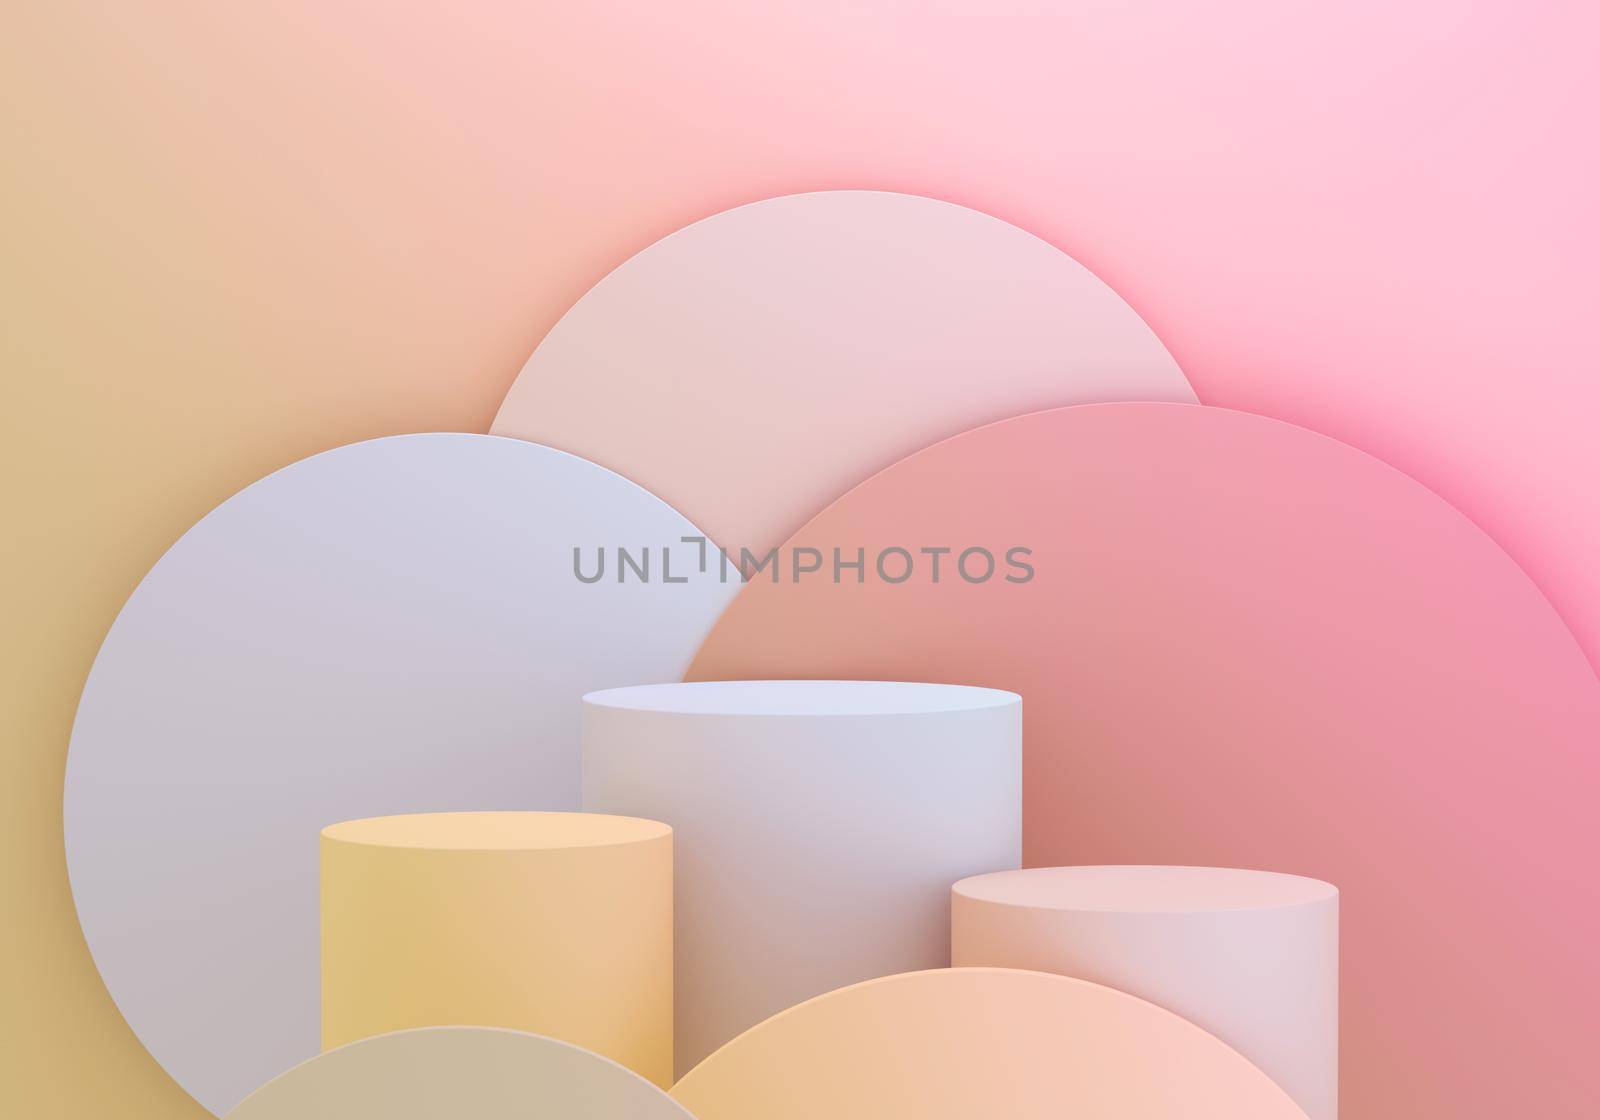 Cylinders pedestal for product display on funny circles pink and yellow background or summer sunny. by ImagesRouges